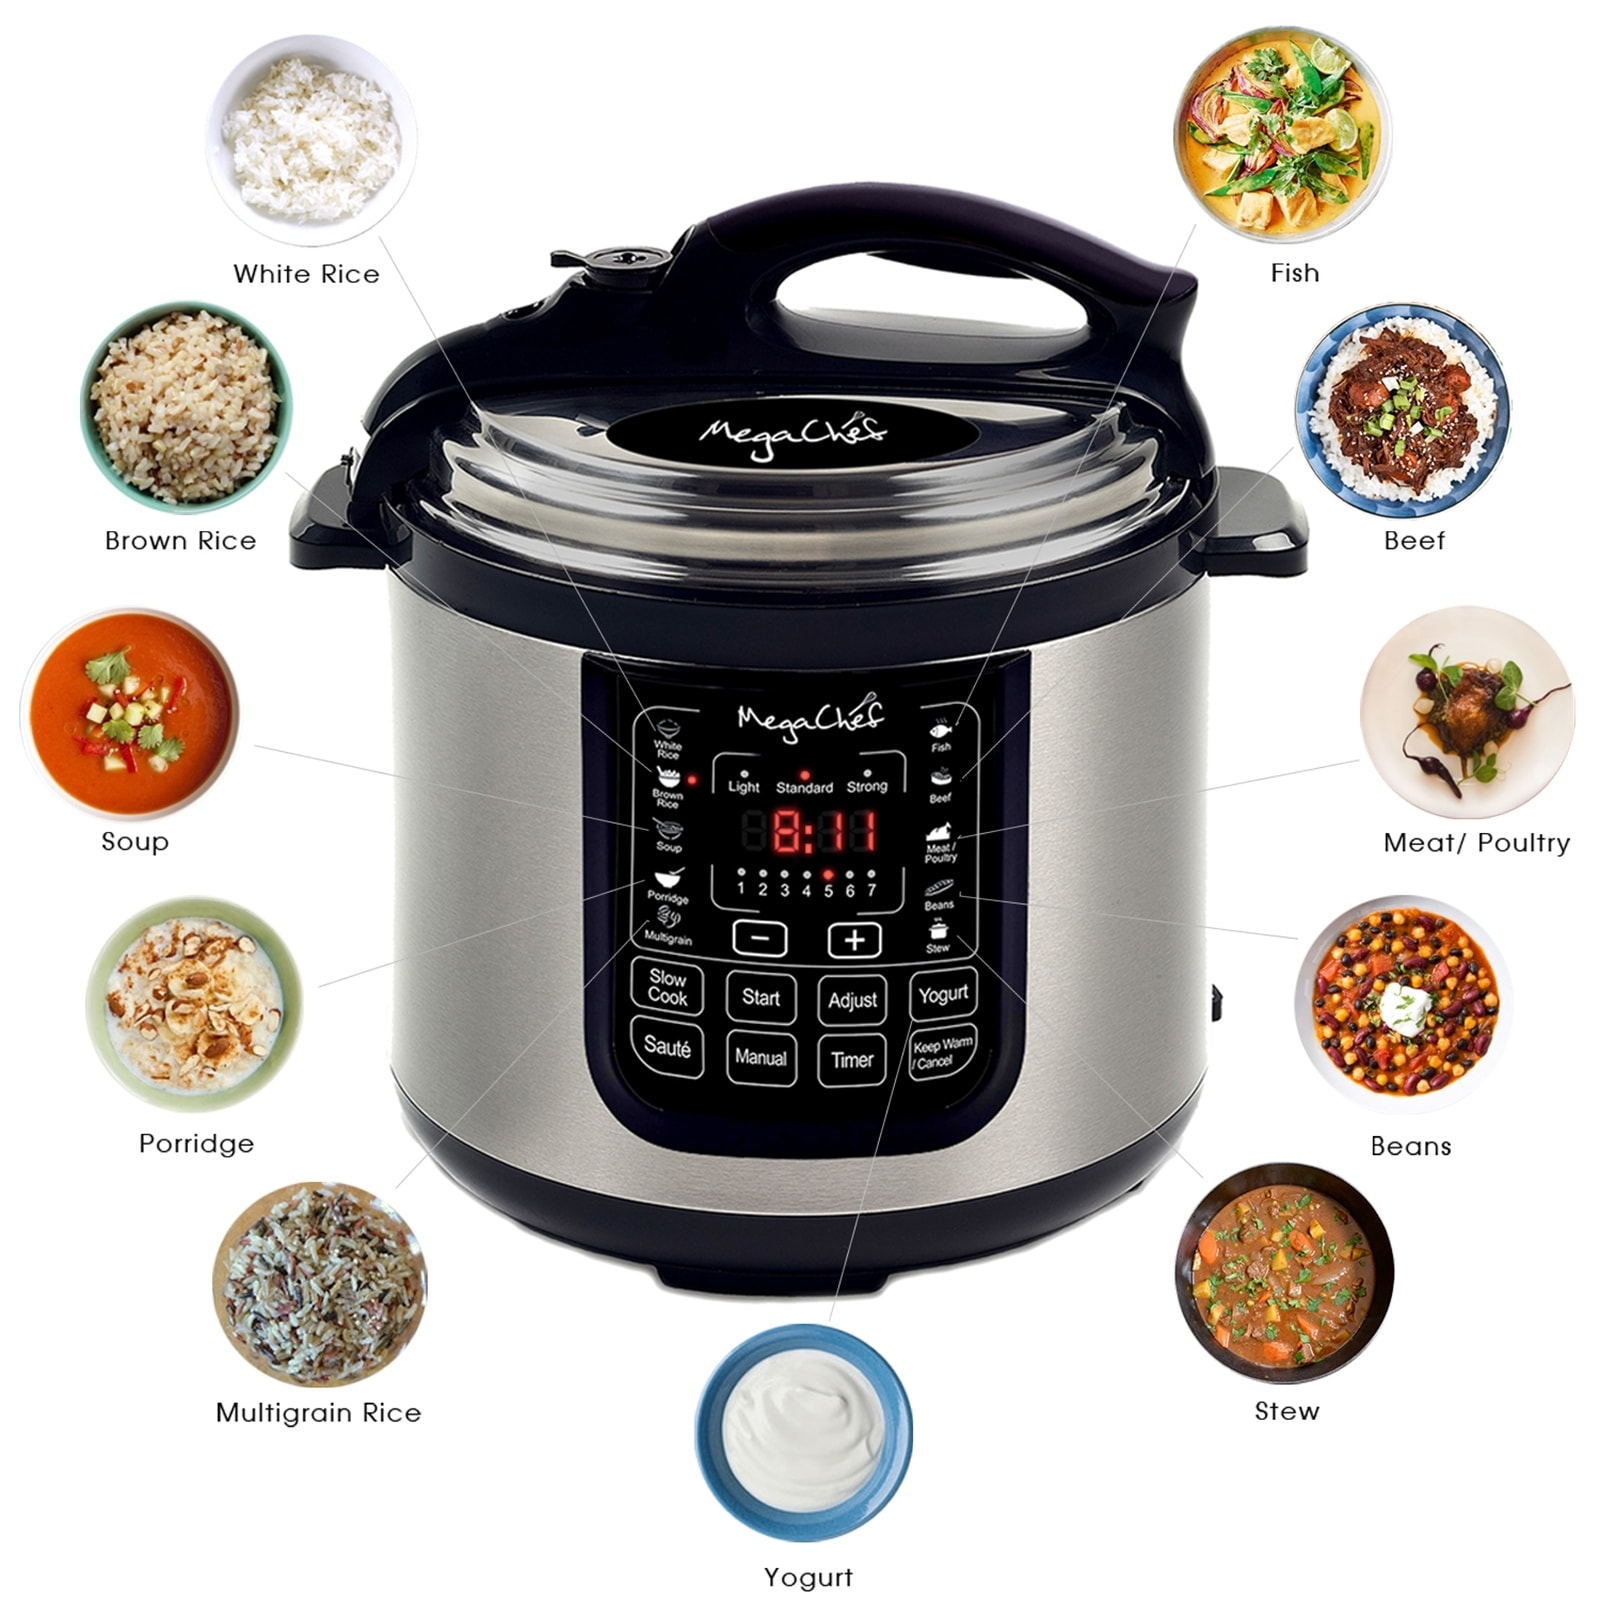 https://ak1.ostkcdn.com/images/products/is/images/direct/31b2535fa5a5cd7b39d5010e8bd69011eacfd31b/MegaChef-Digital-Countertop-Pressure-Cooker-with-8-Quart-Capacity.jpg